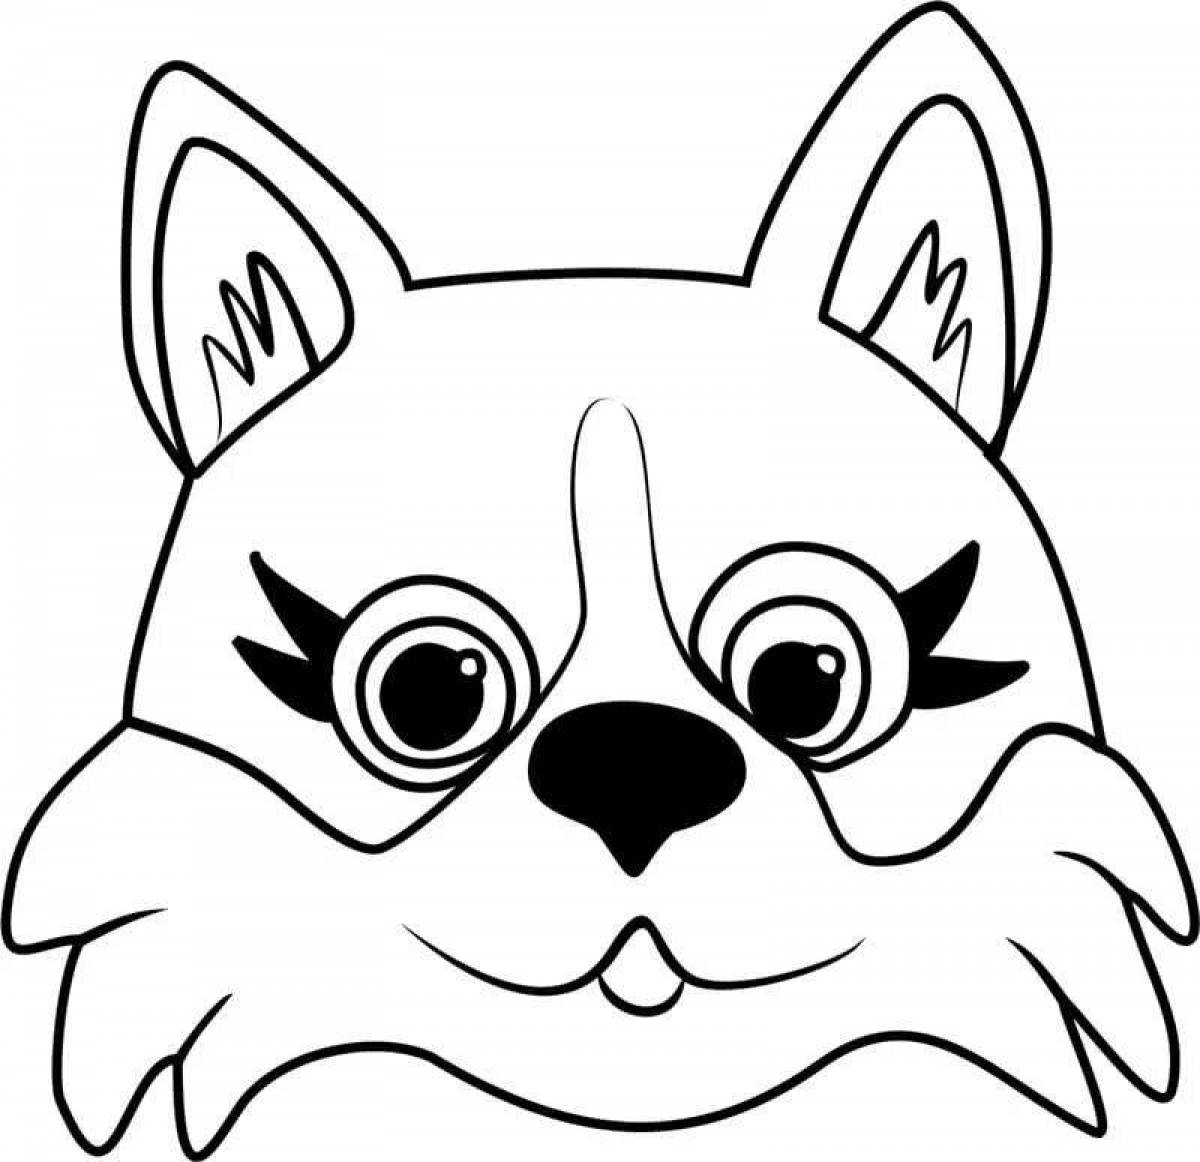 Coloring page excited corgi